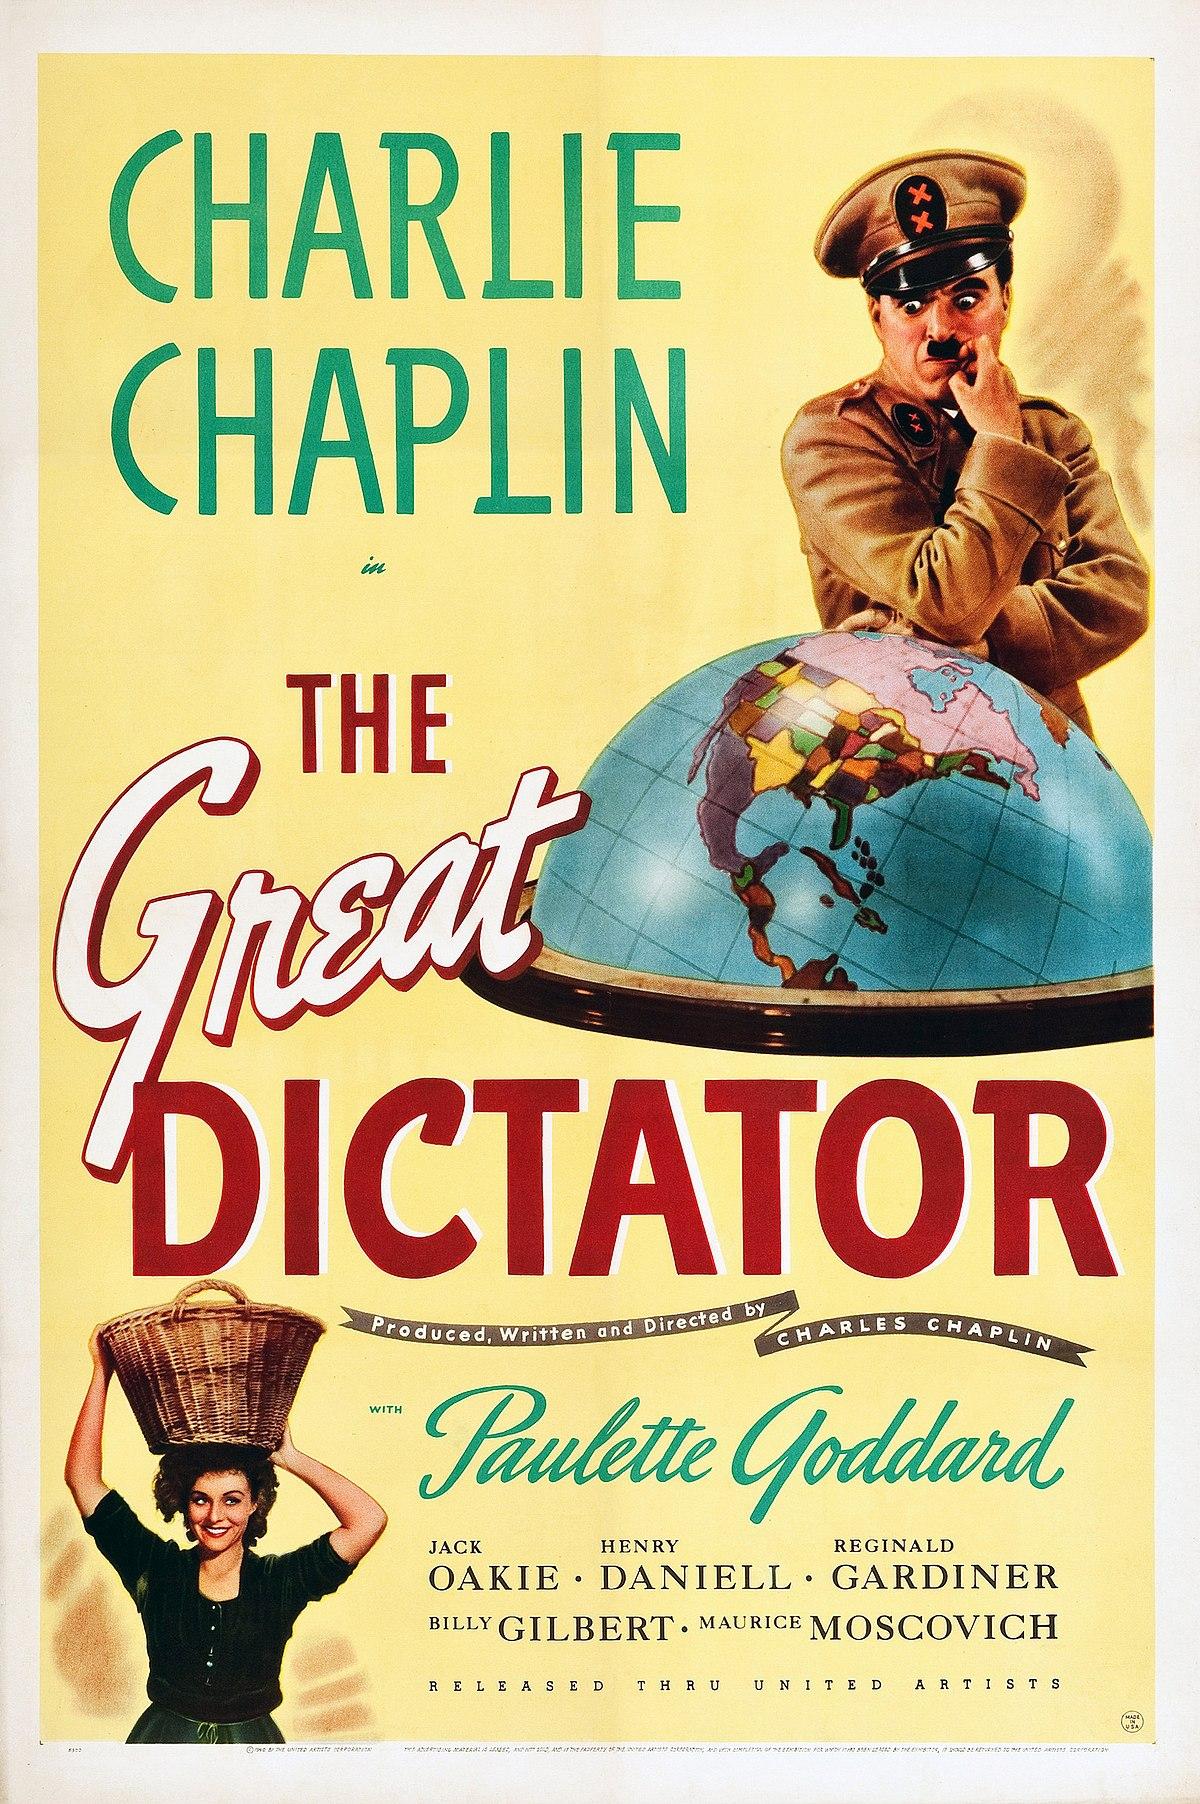 Cover Art for "The Great Dictator"